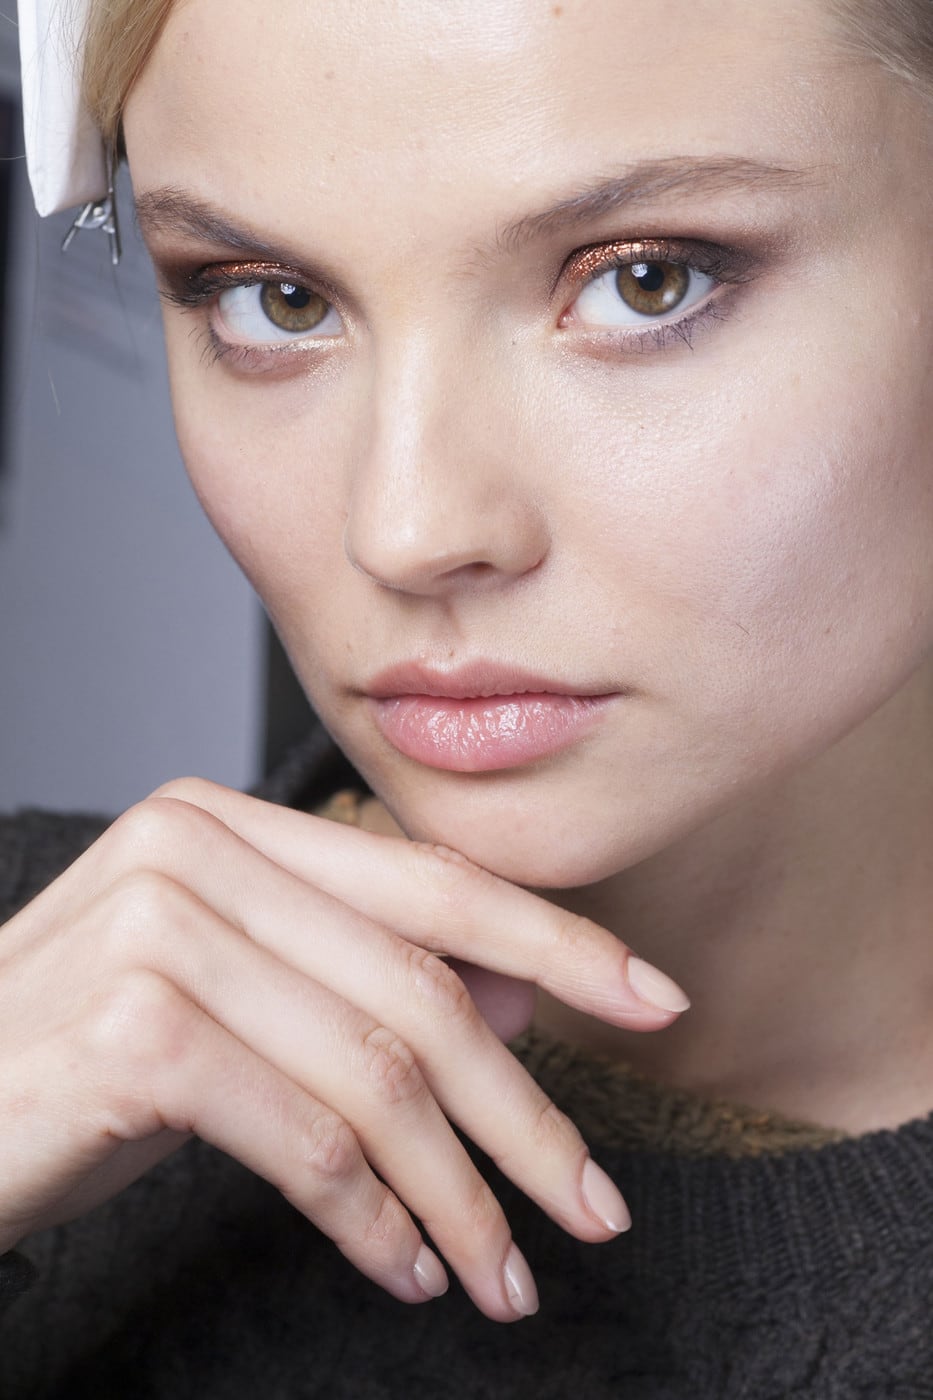 Picture of Magdalena Frackowiak